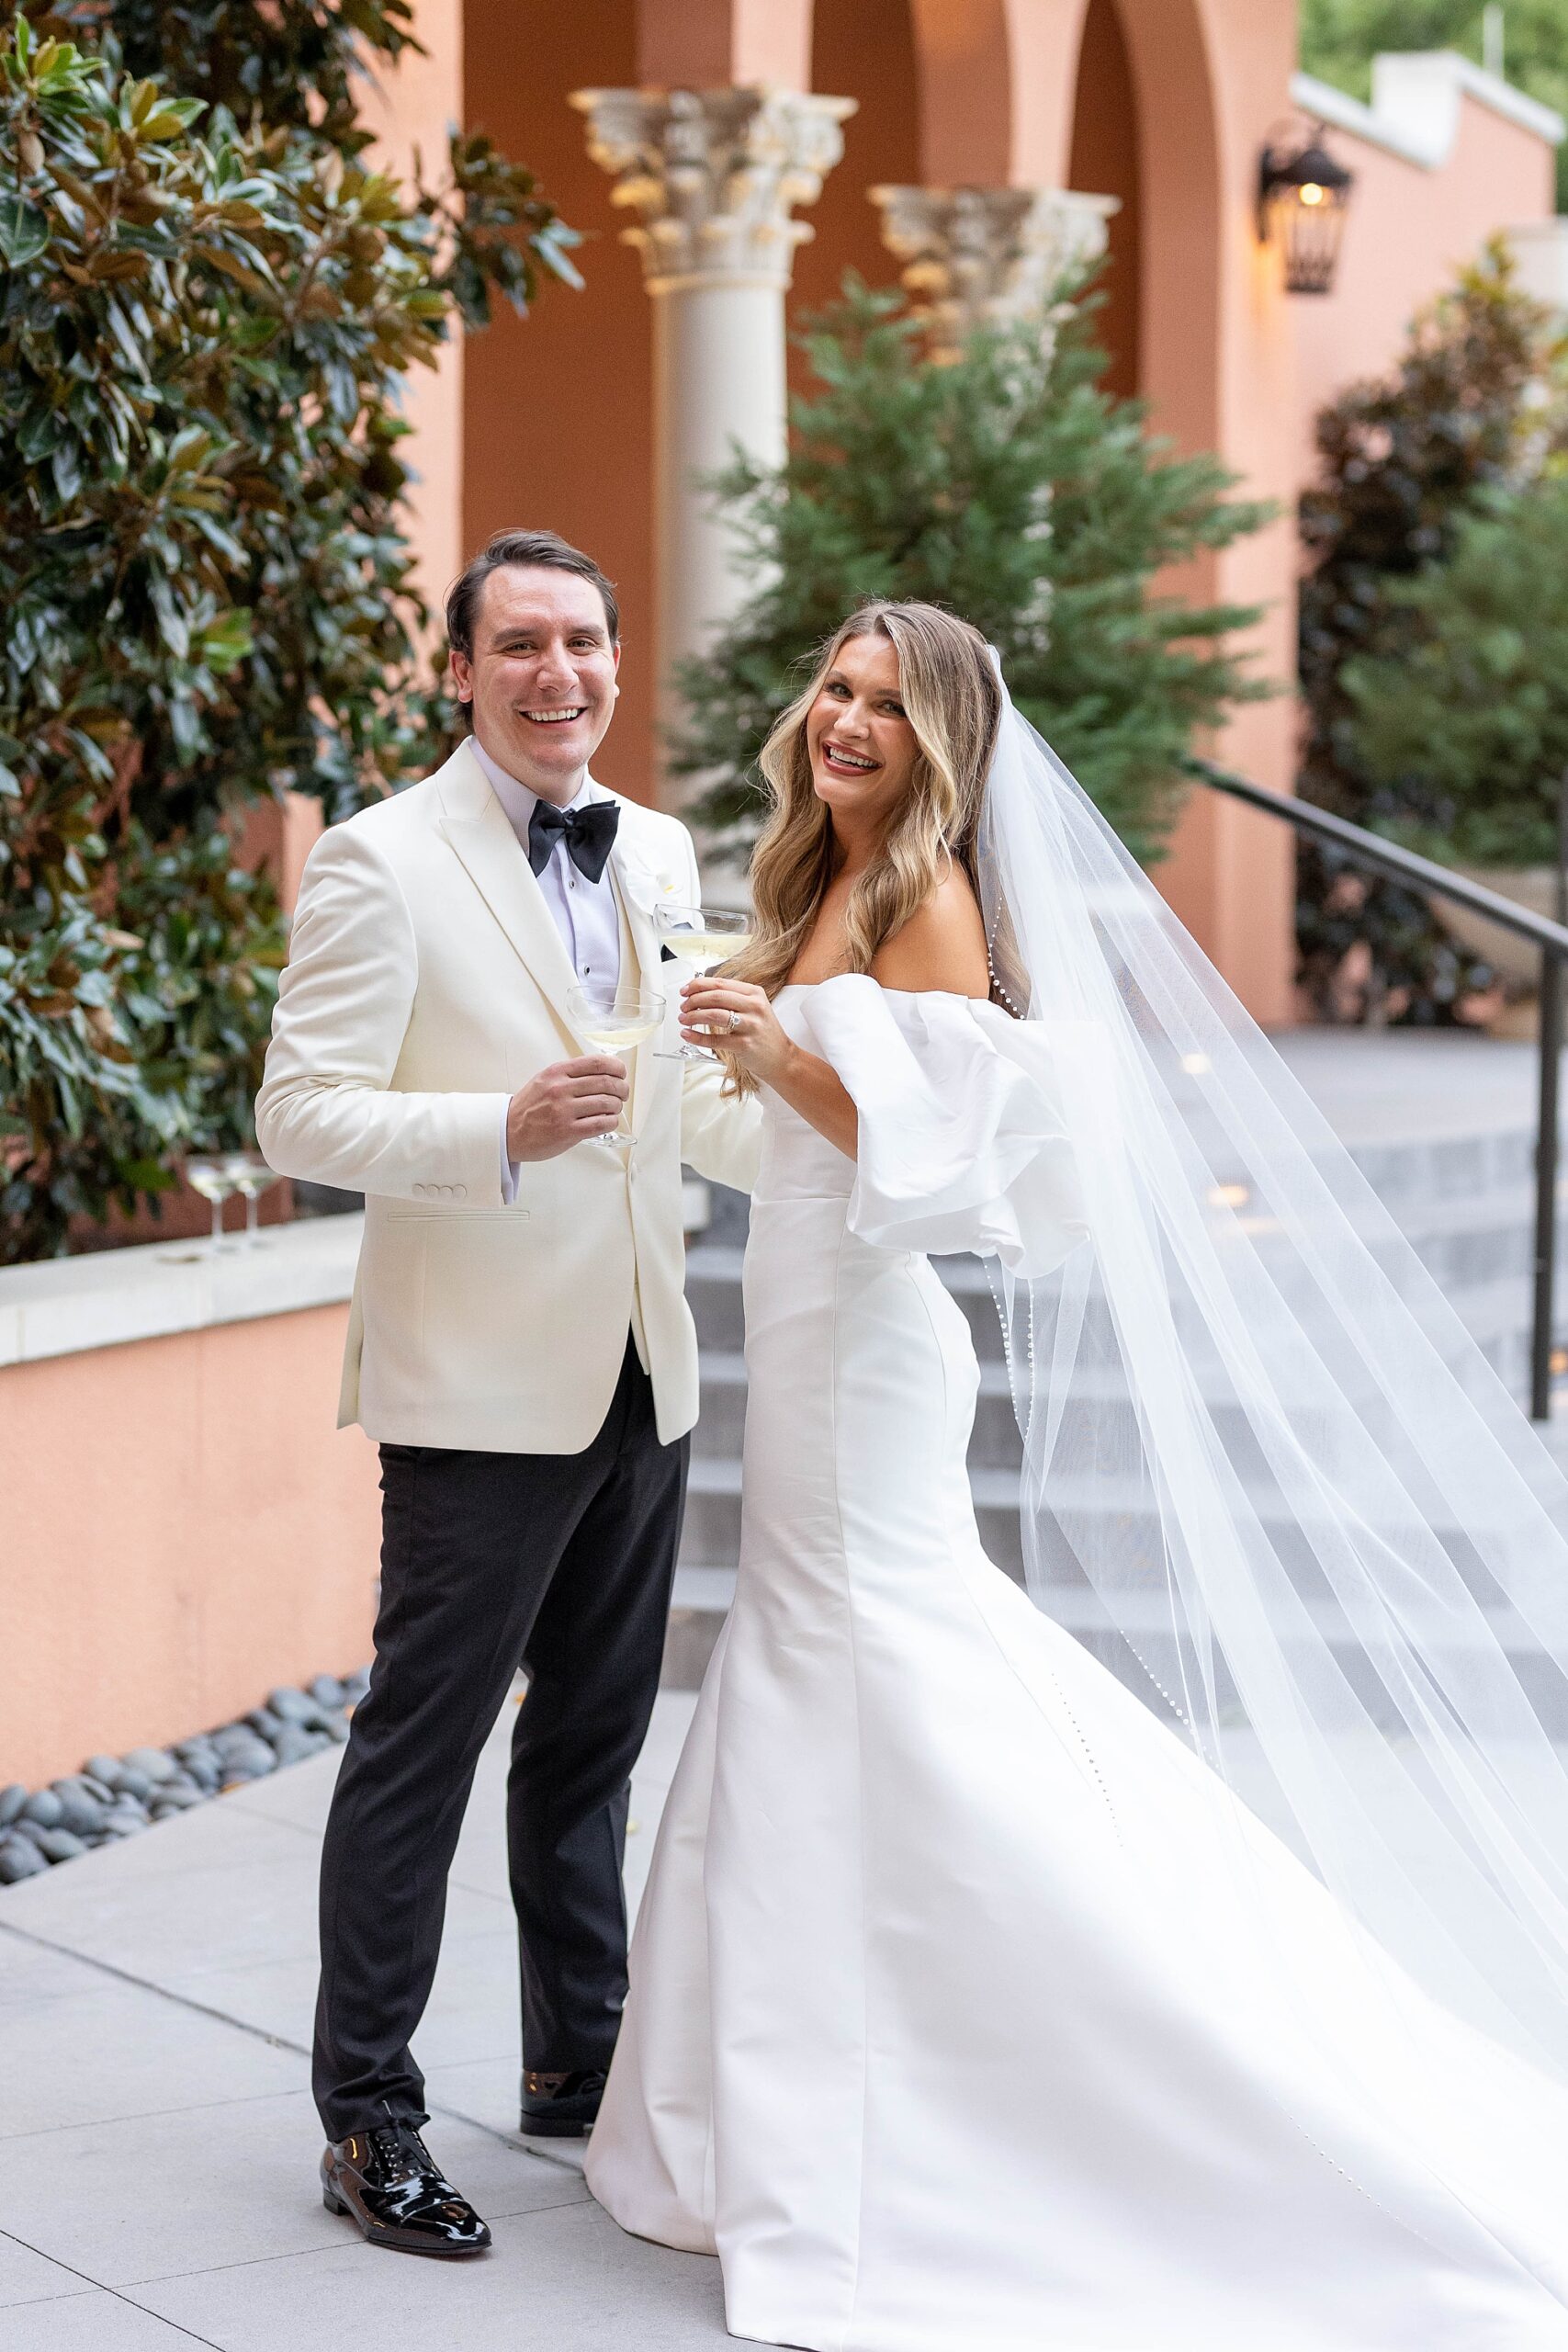 bride and groom toast champagne glasses during Dallas wedding day